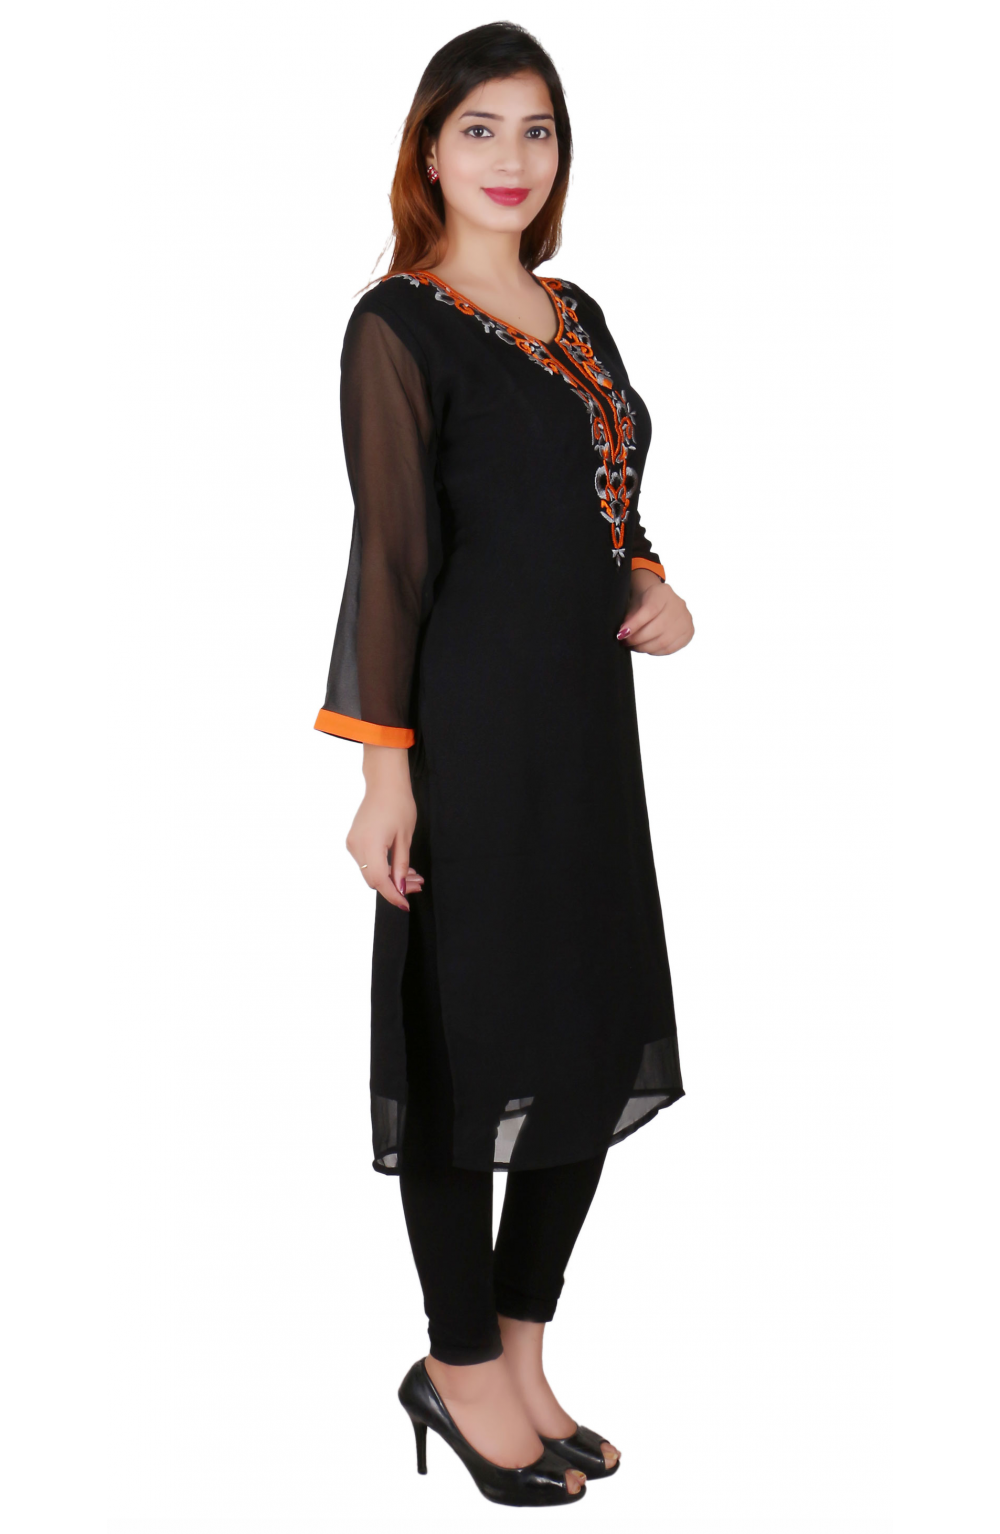 Buy MansiCollections Women's Viscose Half Sleeve Square Neck Black Kurti Top  at Amazon.in